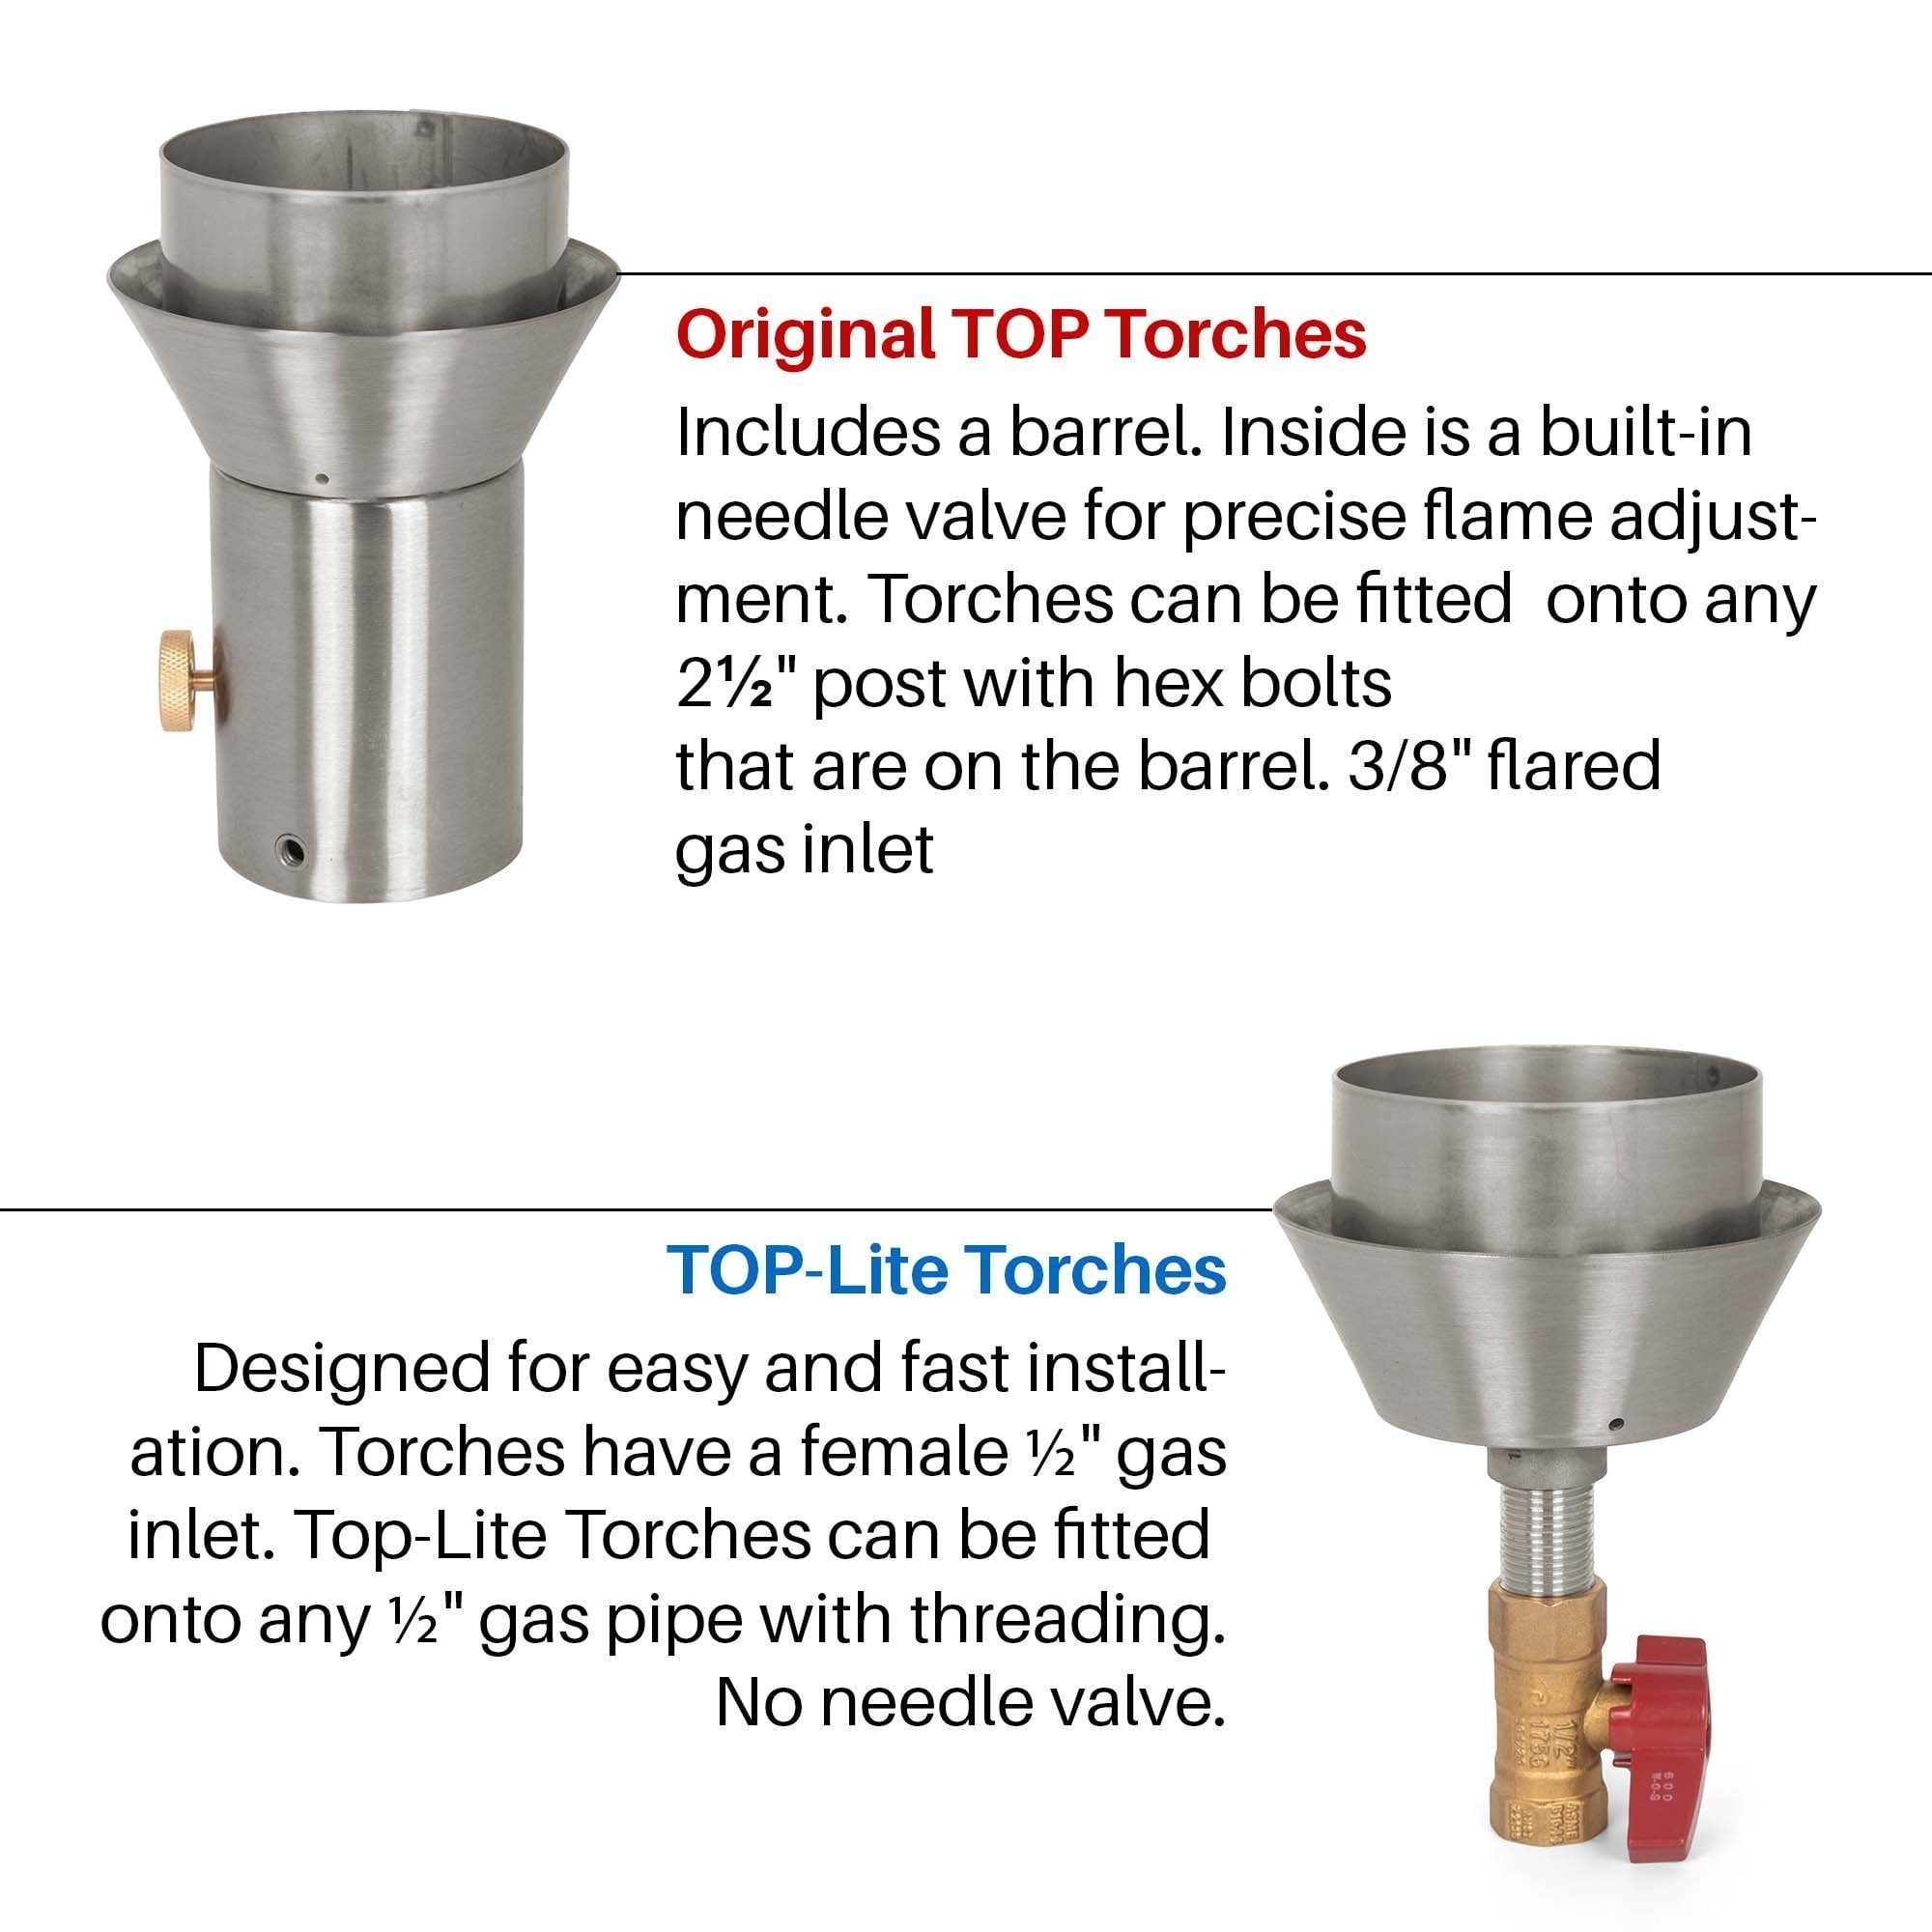 TOP FIRES TROJAN Fire Torch 14" in Stainless Steel - Majestic Fountains